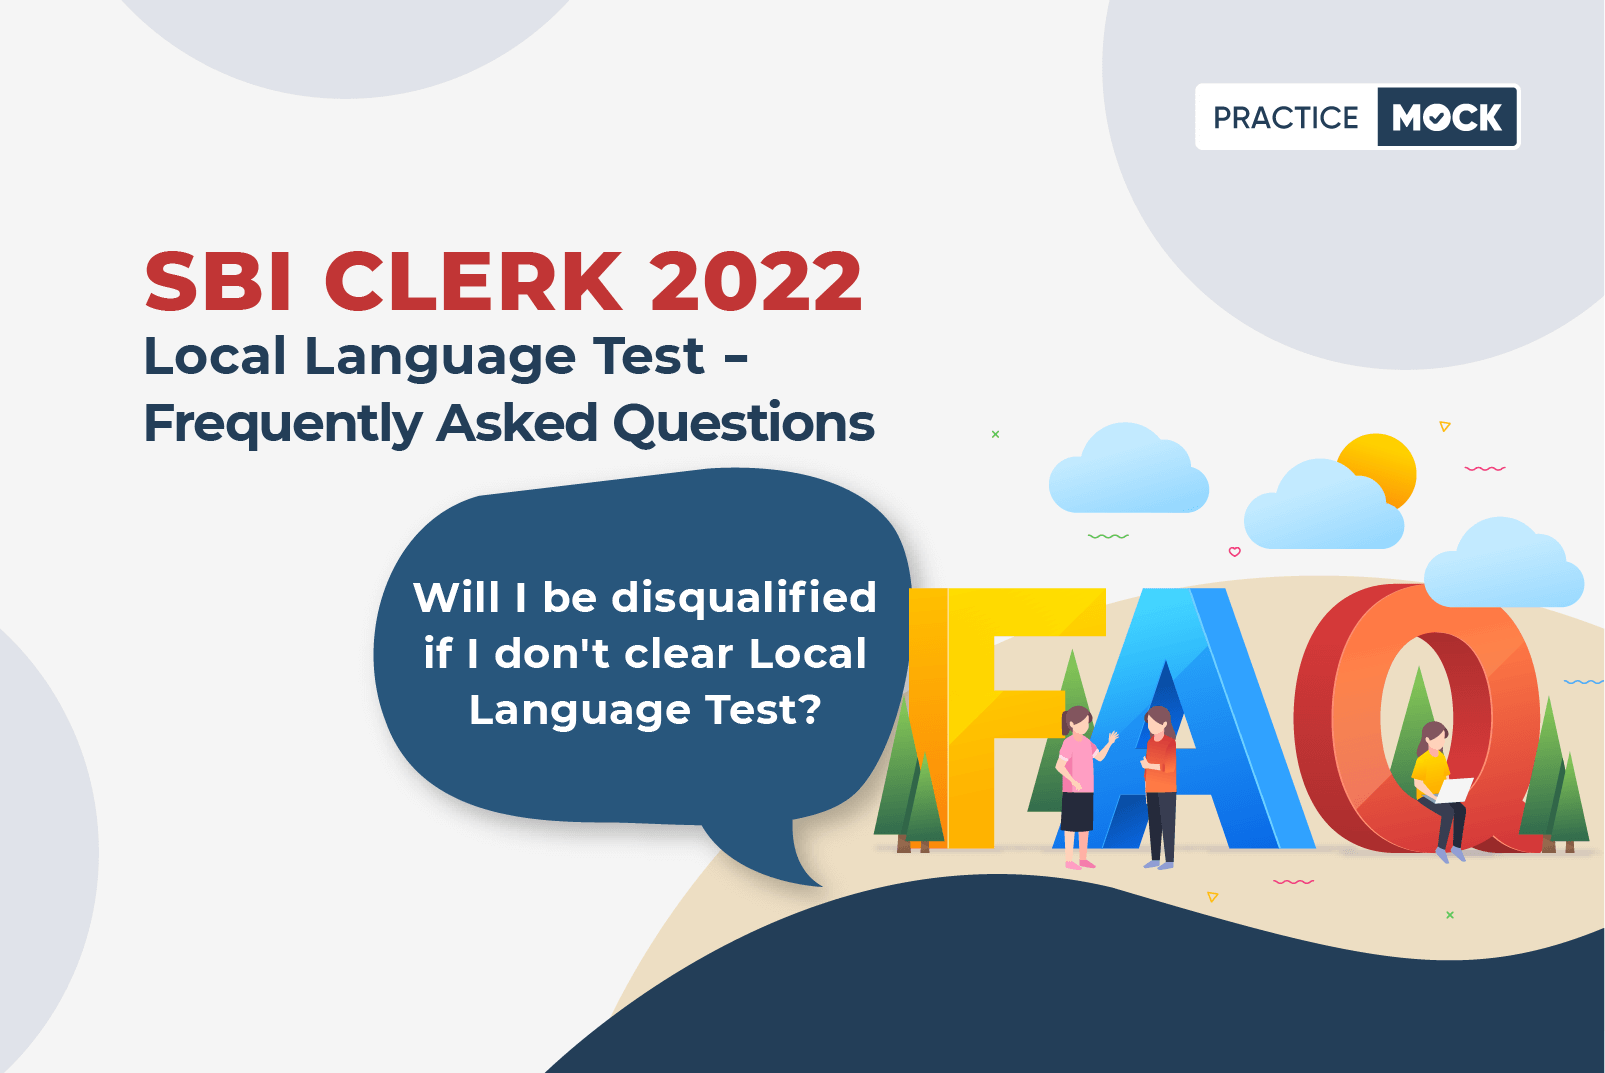 SBI Clerk 2022 Local Language Test- Frequently Asked Questions